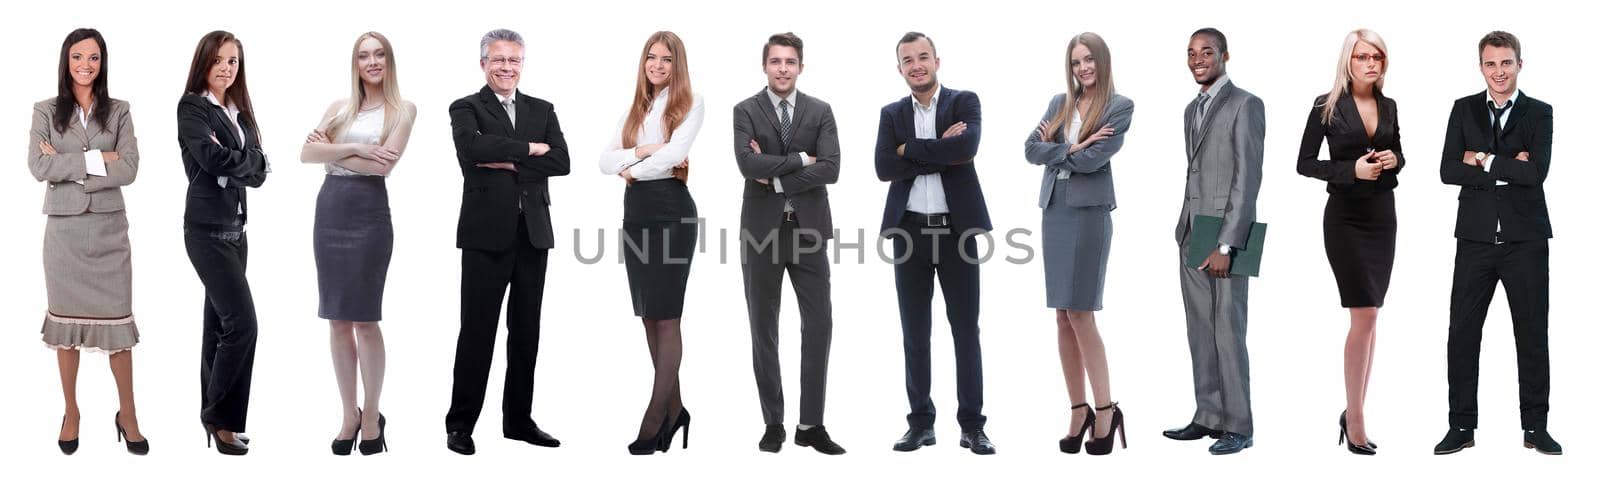 Large group of business people. Isolated over white. by asdf